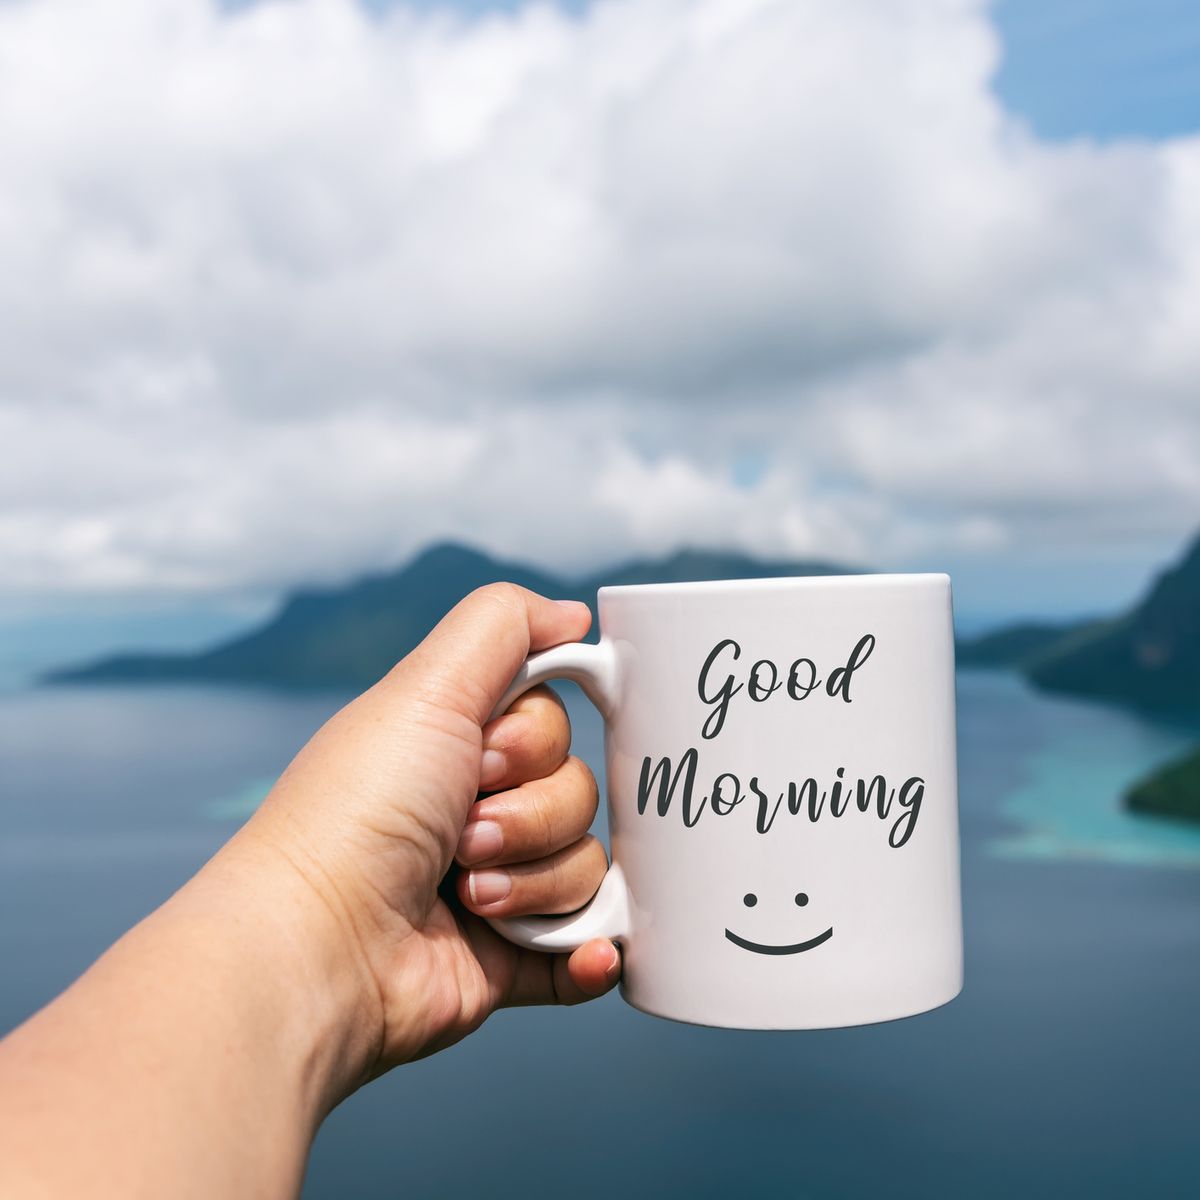 20 Best Good Morning Quotes - Best Short, Famous Good Morning Quotes